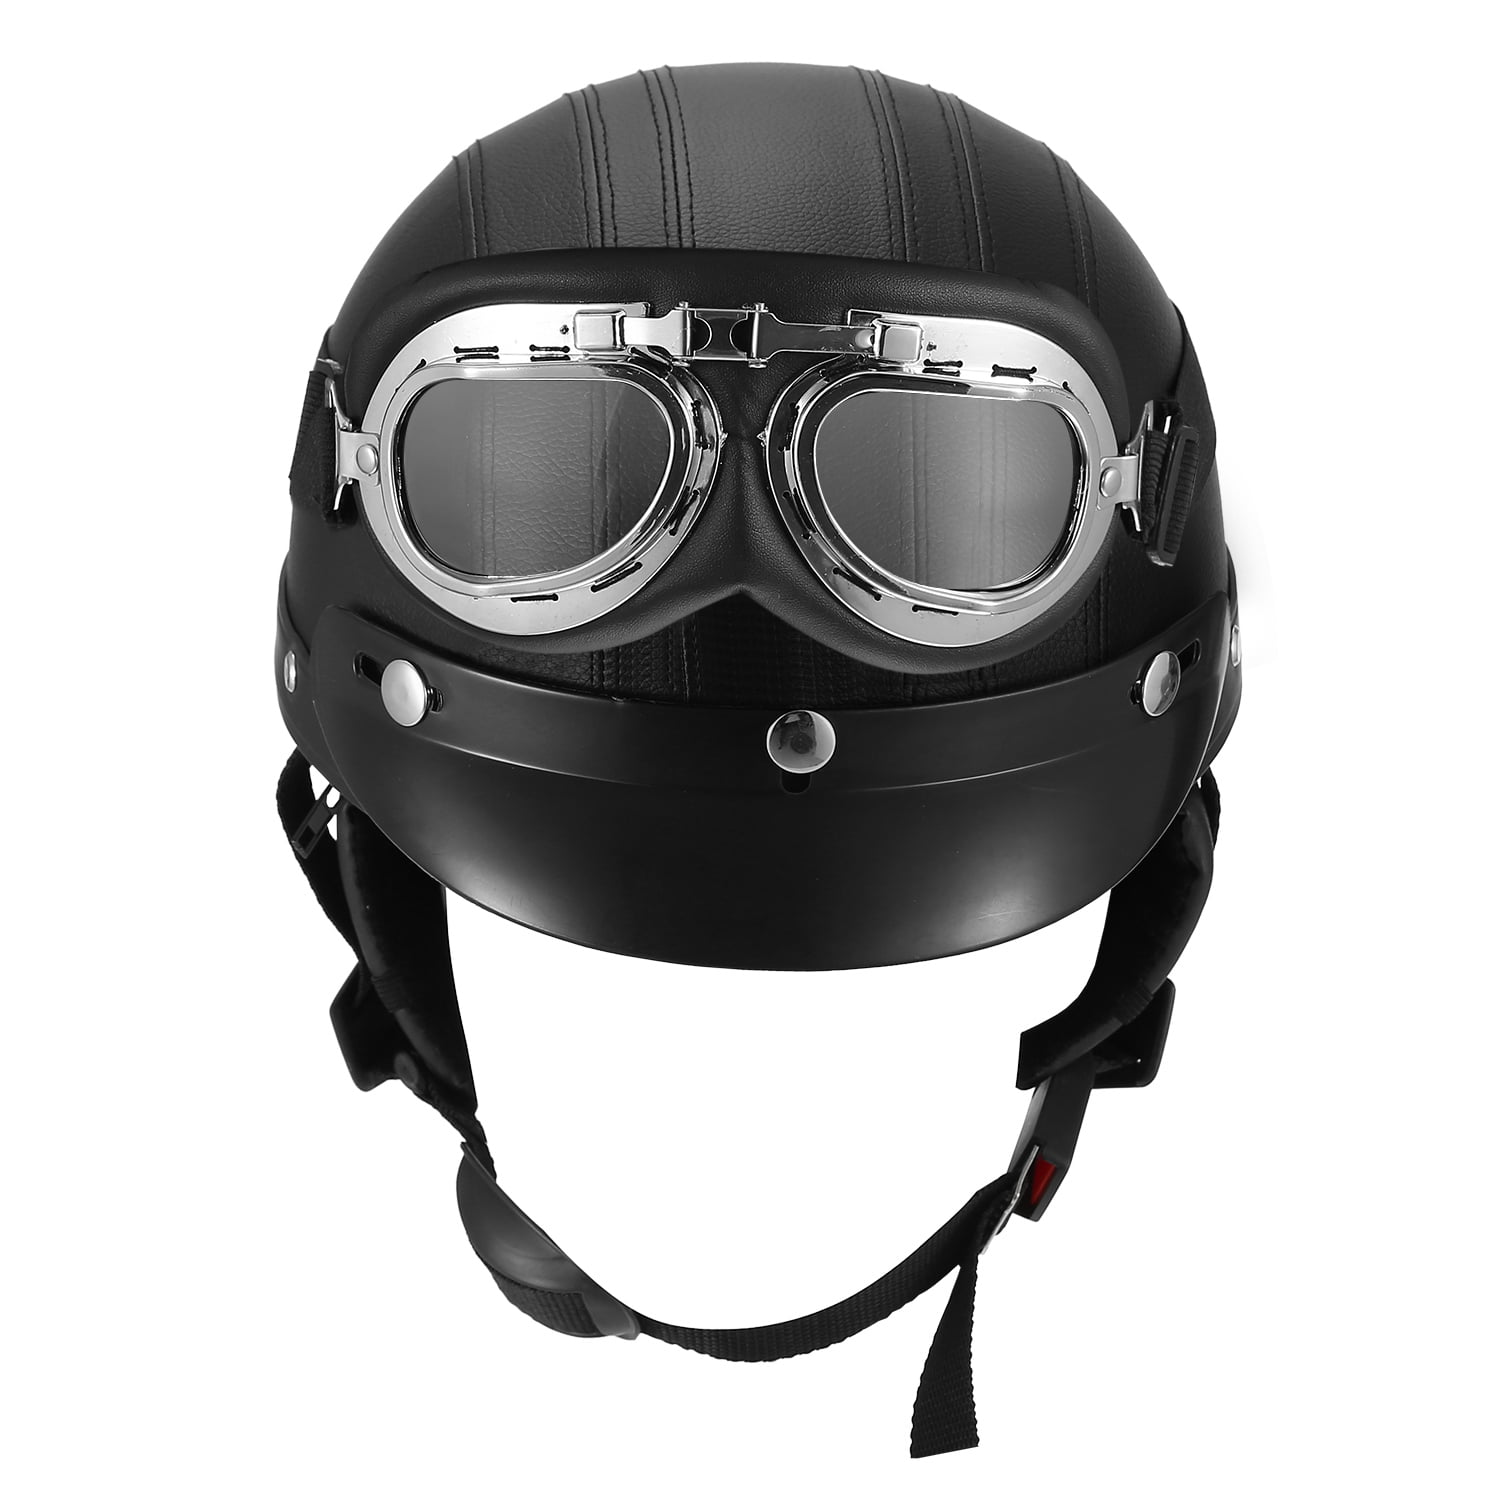 Adult Vintage Half Face Motorcycle Helmet Breathable Anti Fall Scratch Resistant Removable Neck Warmer Mountain Road Motorcycle Helmet Unisex High Performance Comfort Cycle Safety Caps 57-62cm 